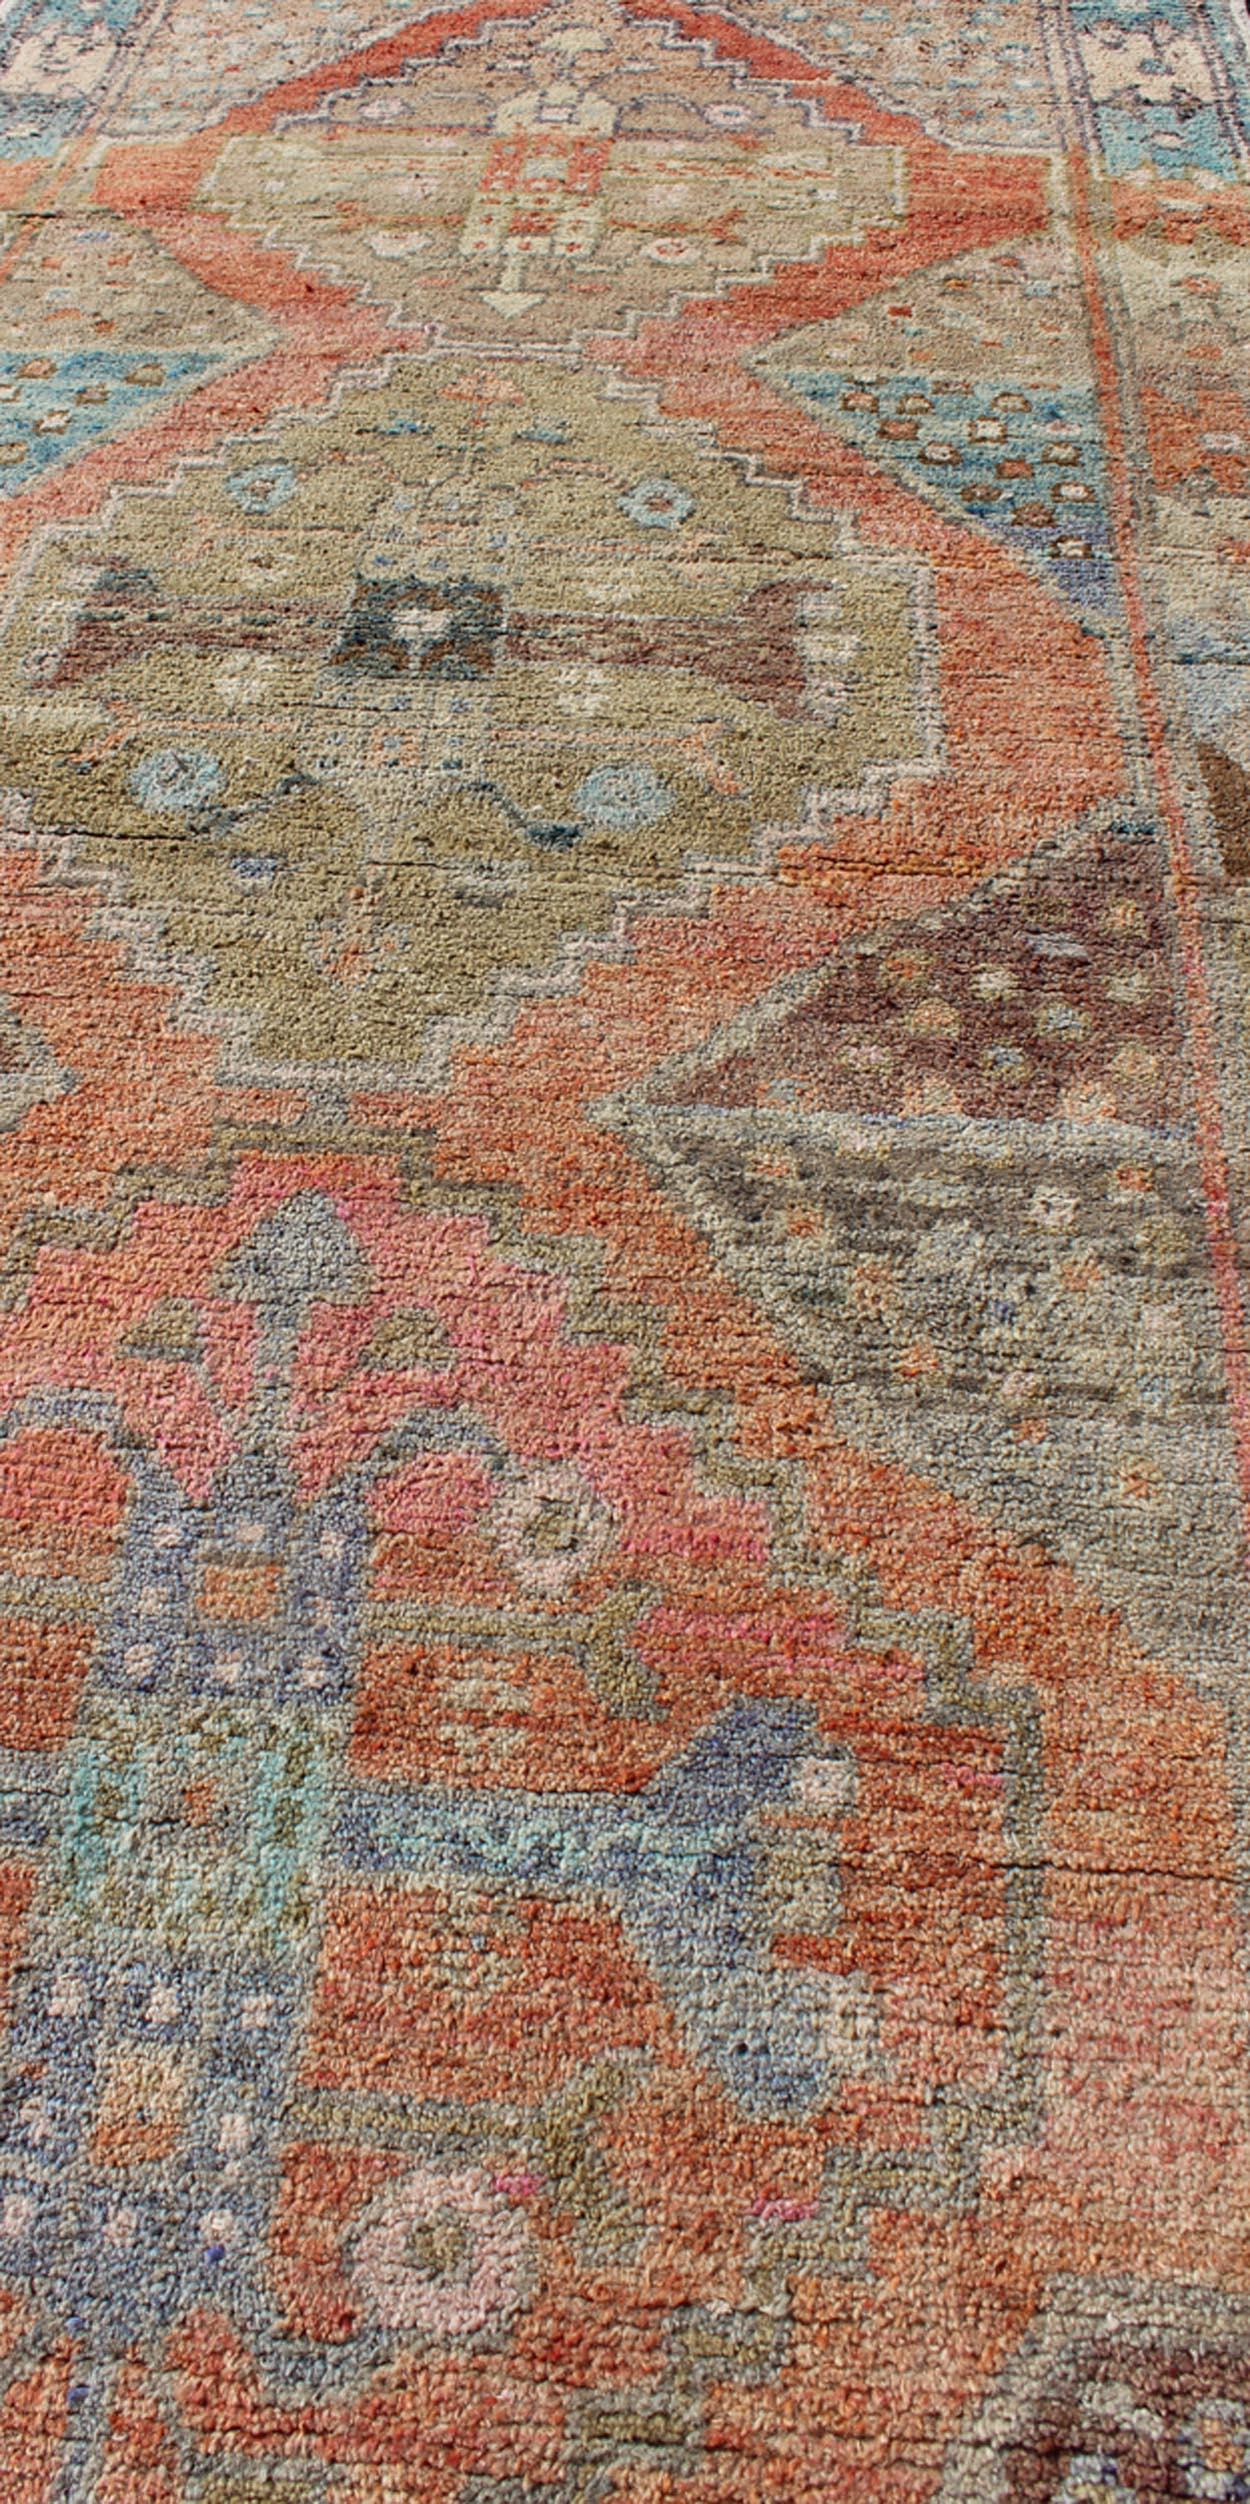 20th Century Antique Turkish Oushak Runner in Coral, Blue, Brown, Yellow Green & Rust Red For Sale